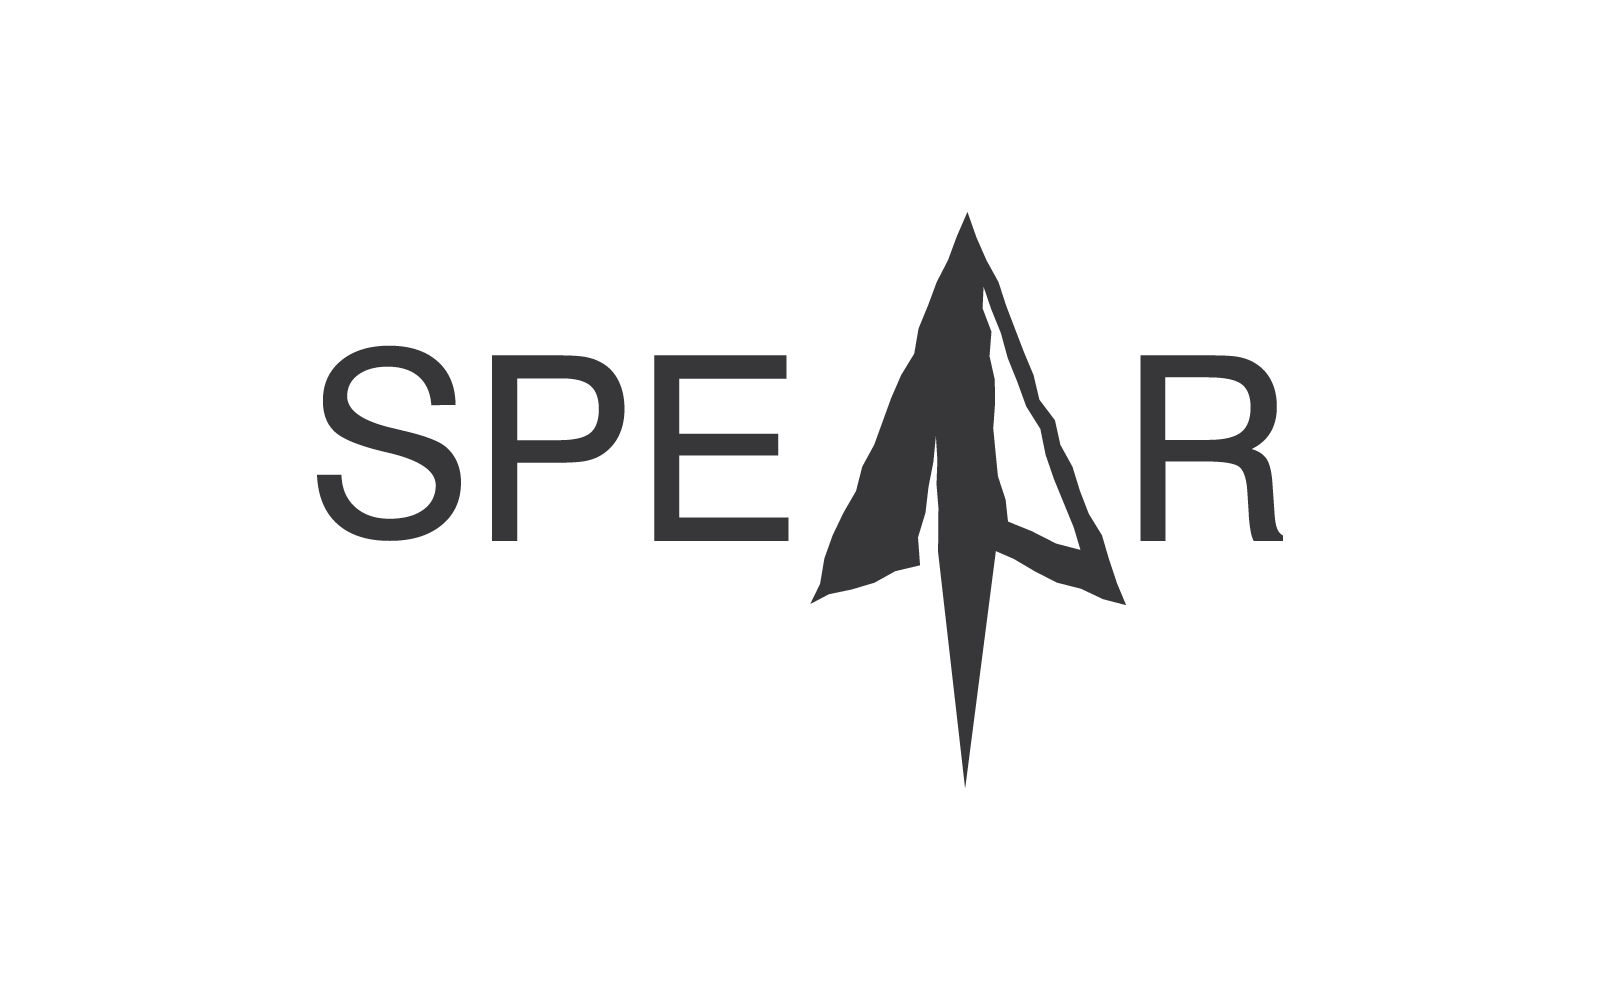 Spear logo and symbol vector flat design template